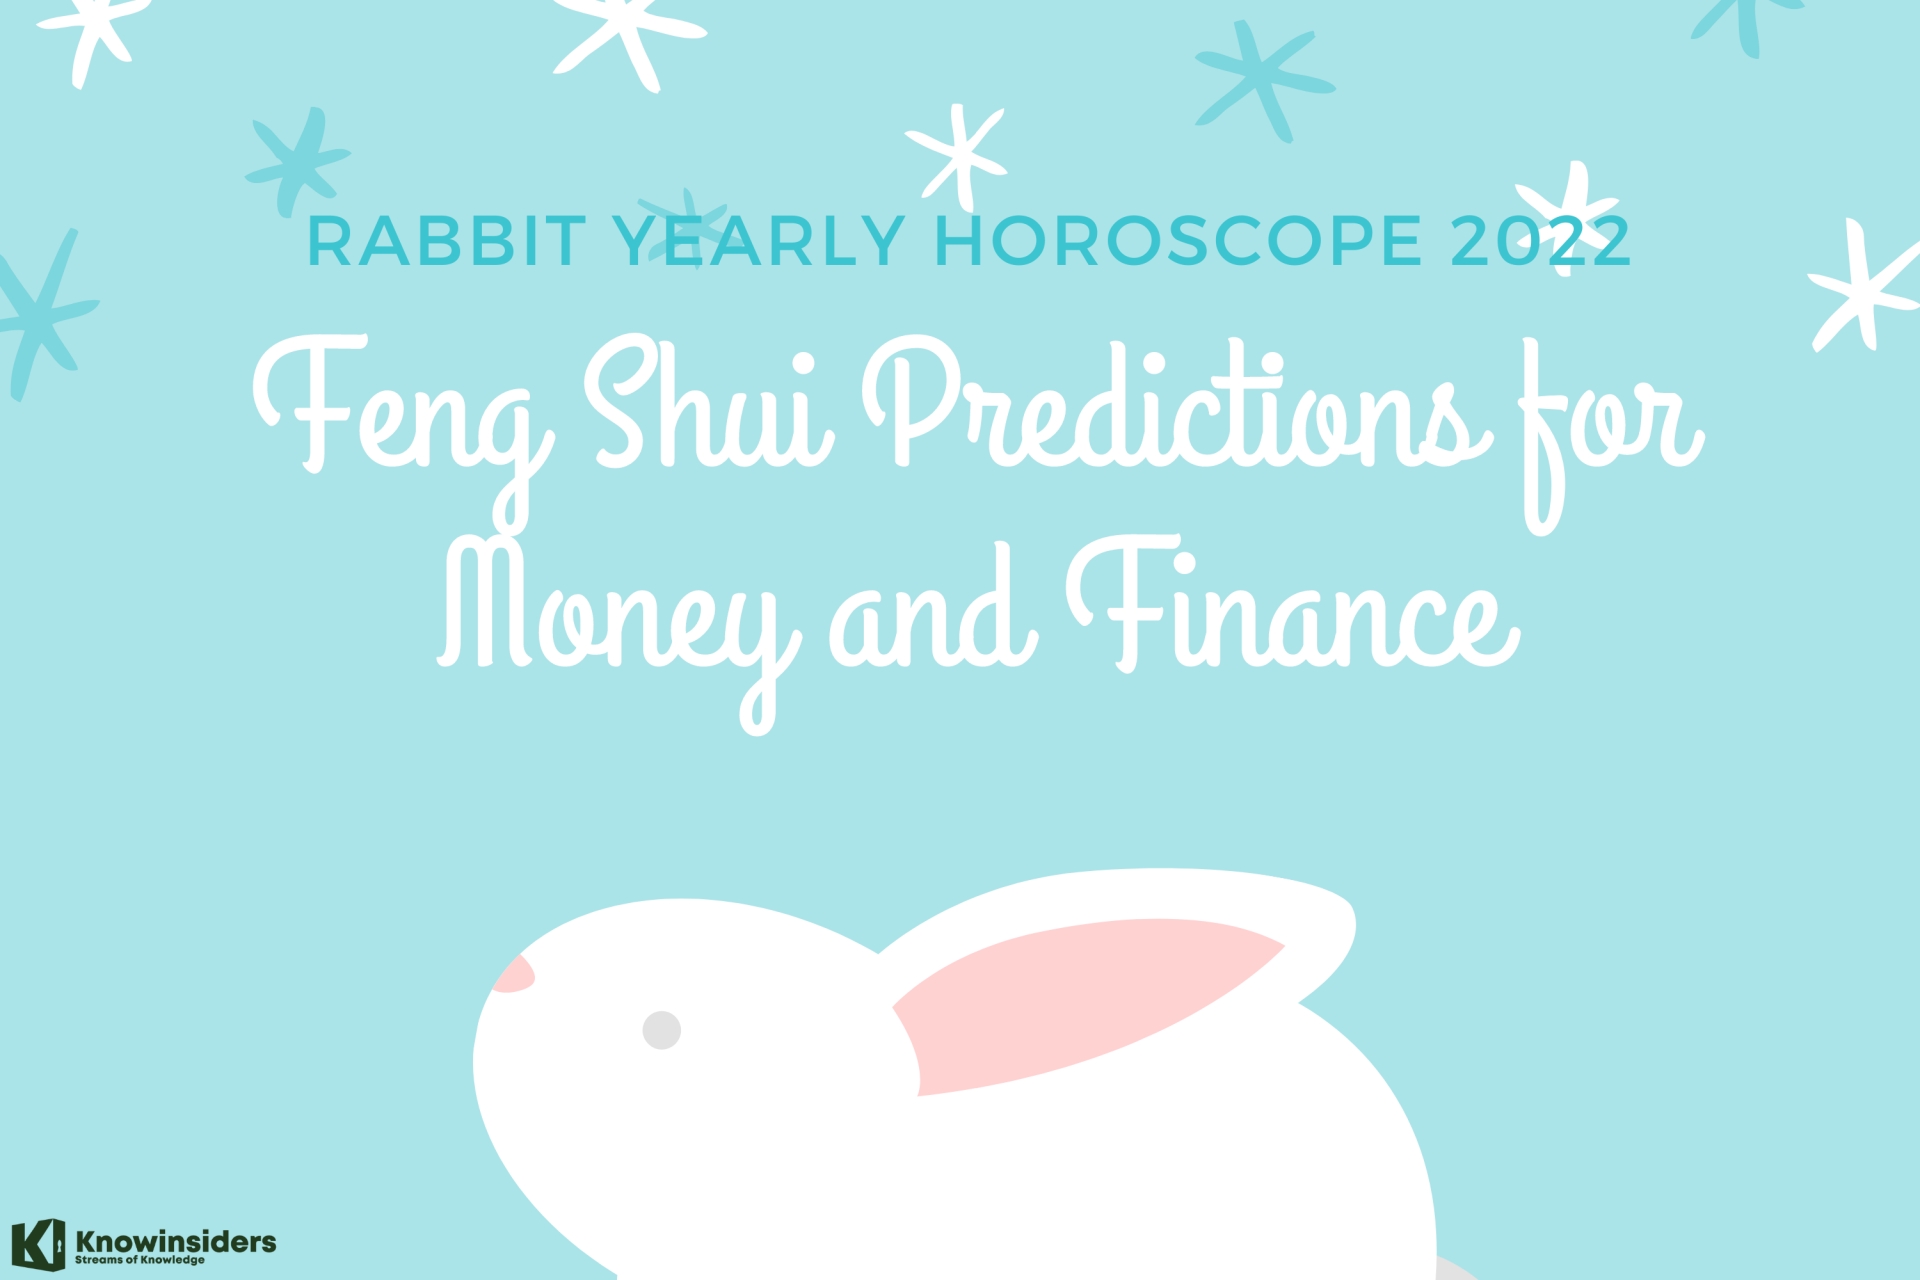 Rabbit Yearly Horoscope 2022: Feng Shui Prediction For Money and Finance